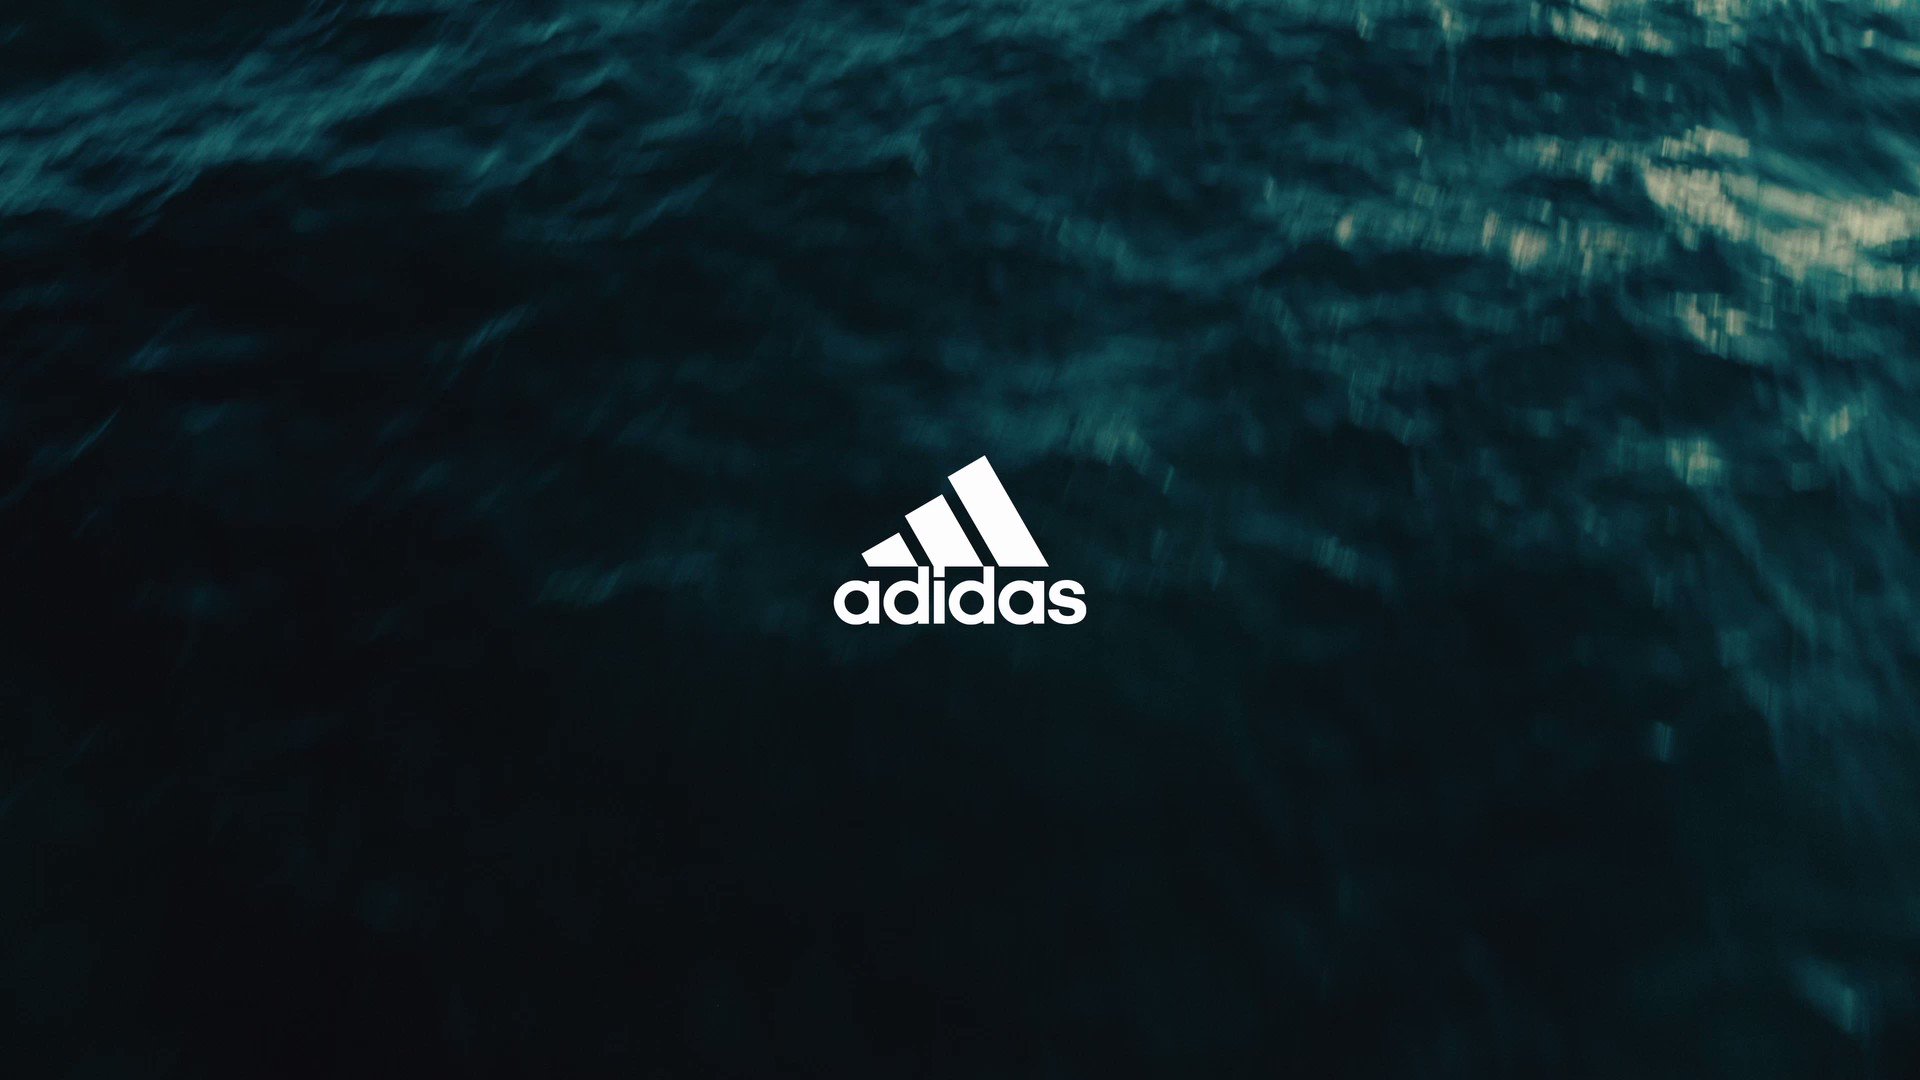 adidas on Twitter: "This one is for the ​ Sign up to Run For The Oceans and help end plastic waste: https://t.co/AKANM7ASFW Together, impossible is nothing. ​ #RunForTheOceans #adidasParley #ImpossibleIsNothing https://t.co/s2dWwJzgCb" /